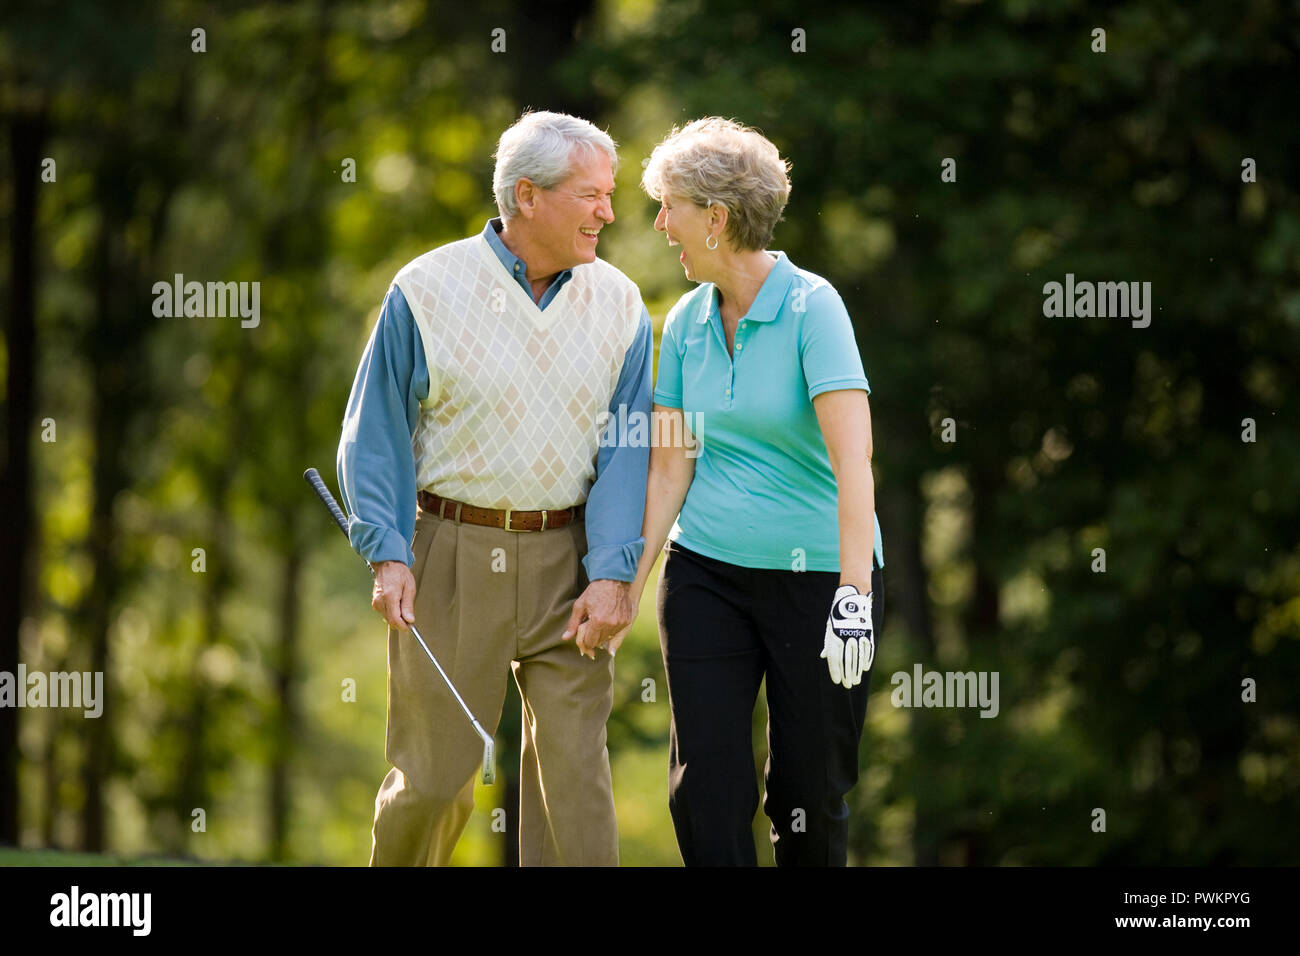 Older couple laughing on golf course Stock Photo